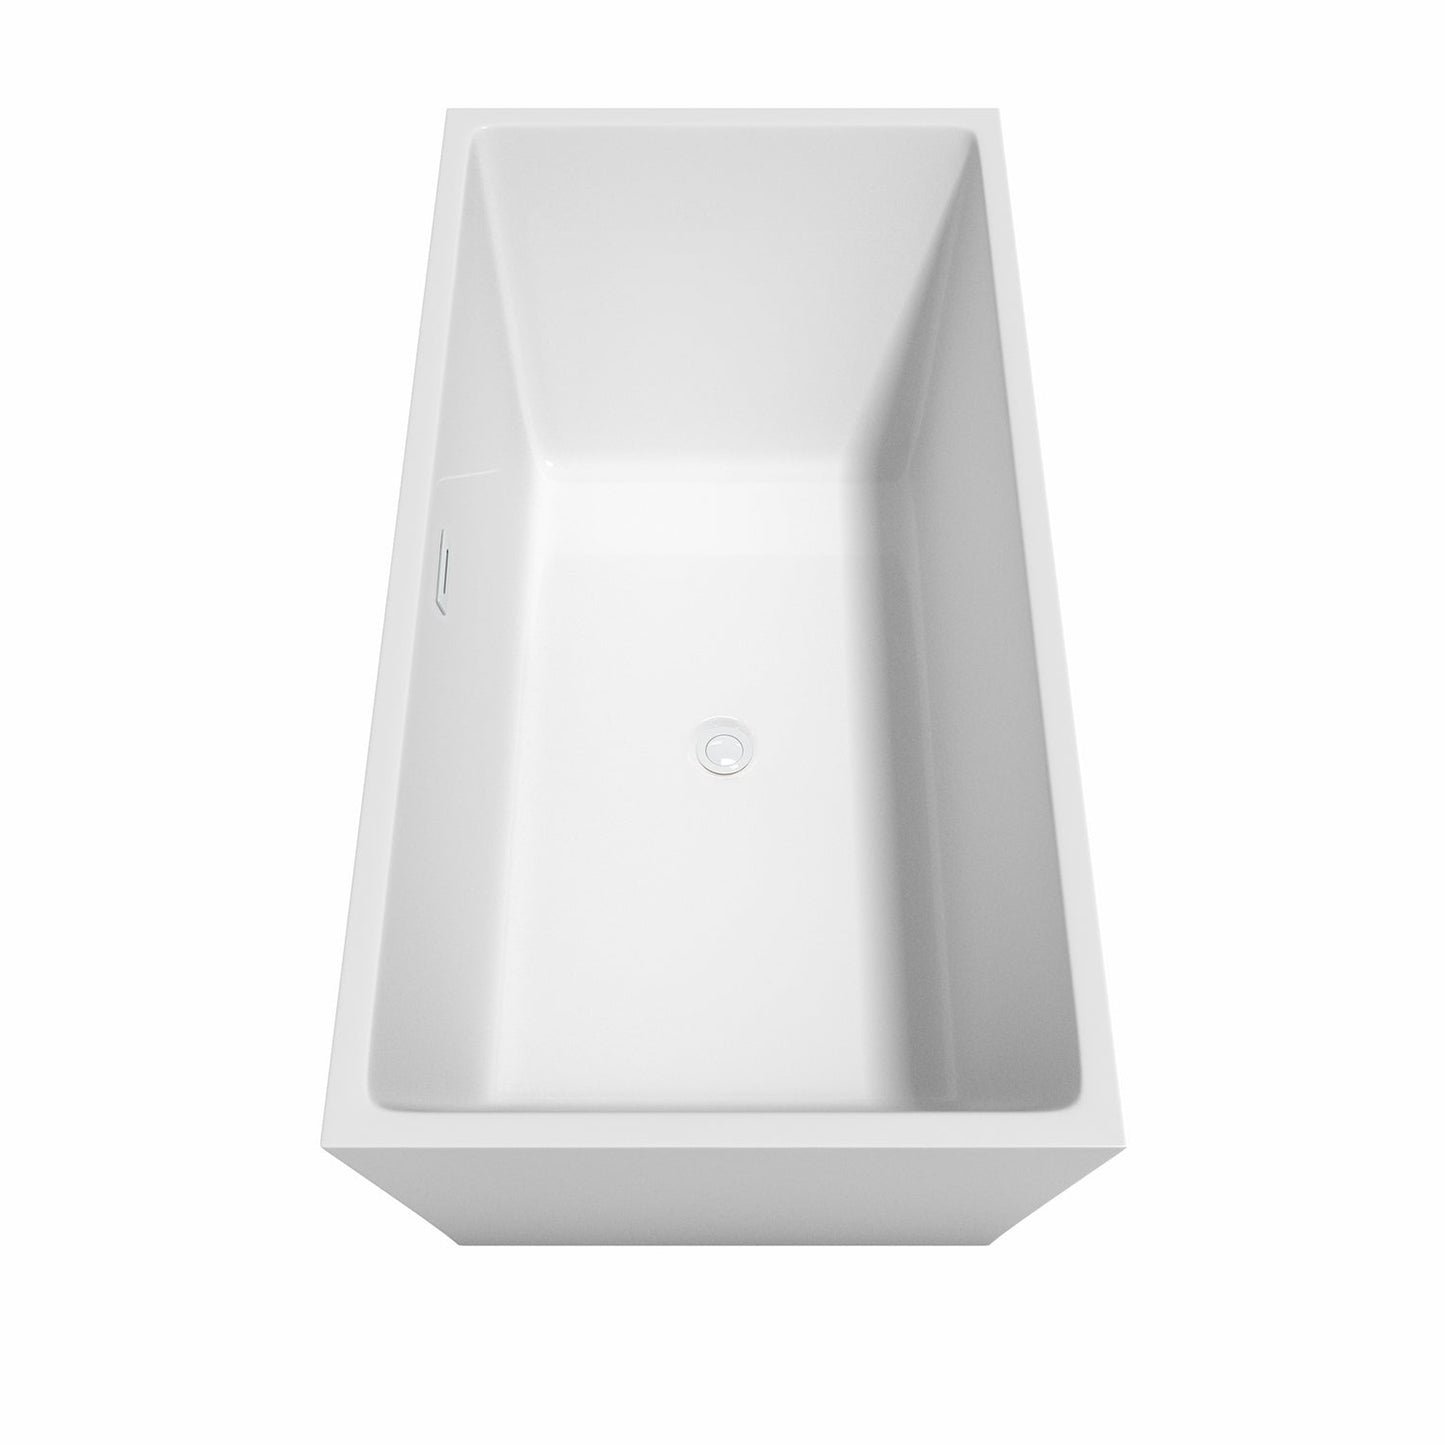 Wyndham Collection Sara 63" Freestanding Bathtub in White With Shiny White Trim and Floor Mounted Faucet in Brushed Gold